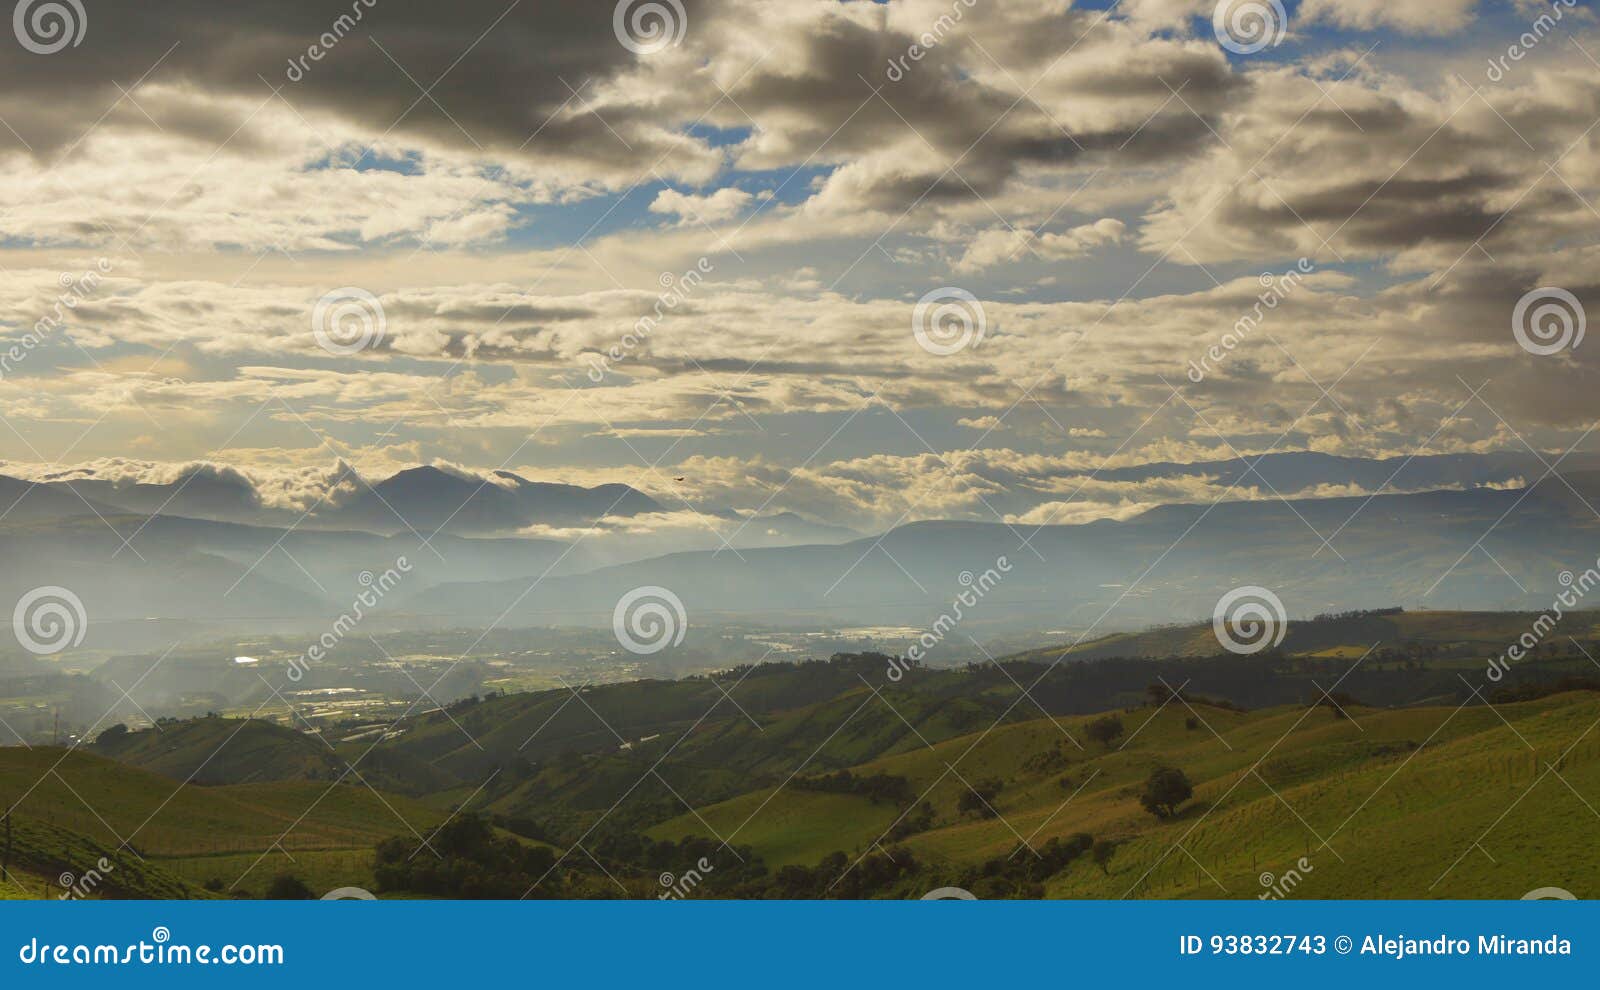 view of a sunset with very cloudy sky over cultivated fields in the area near the village of checa